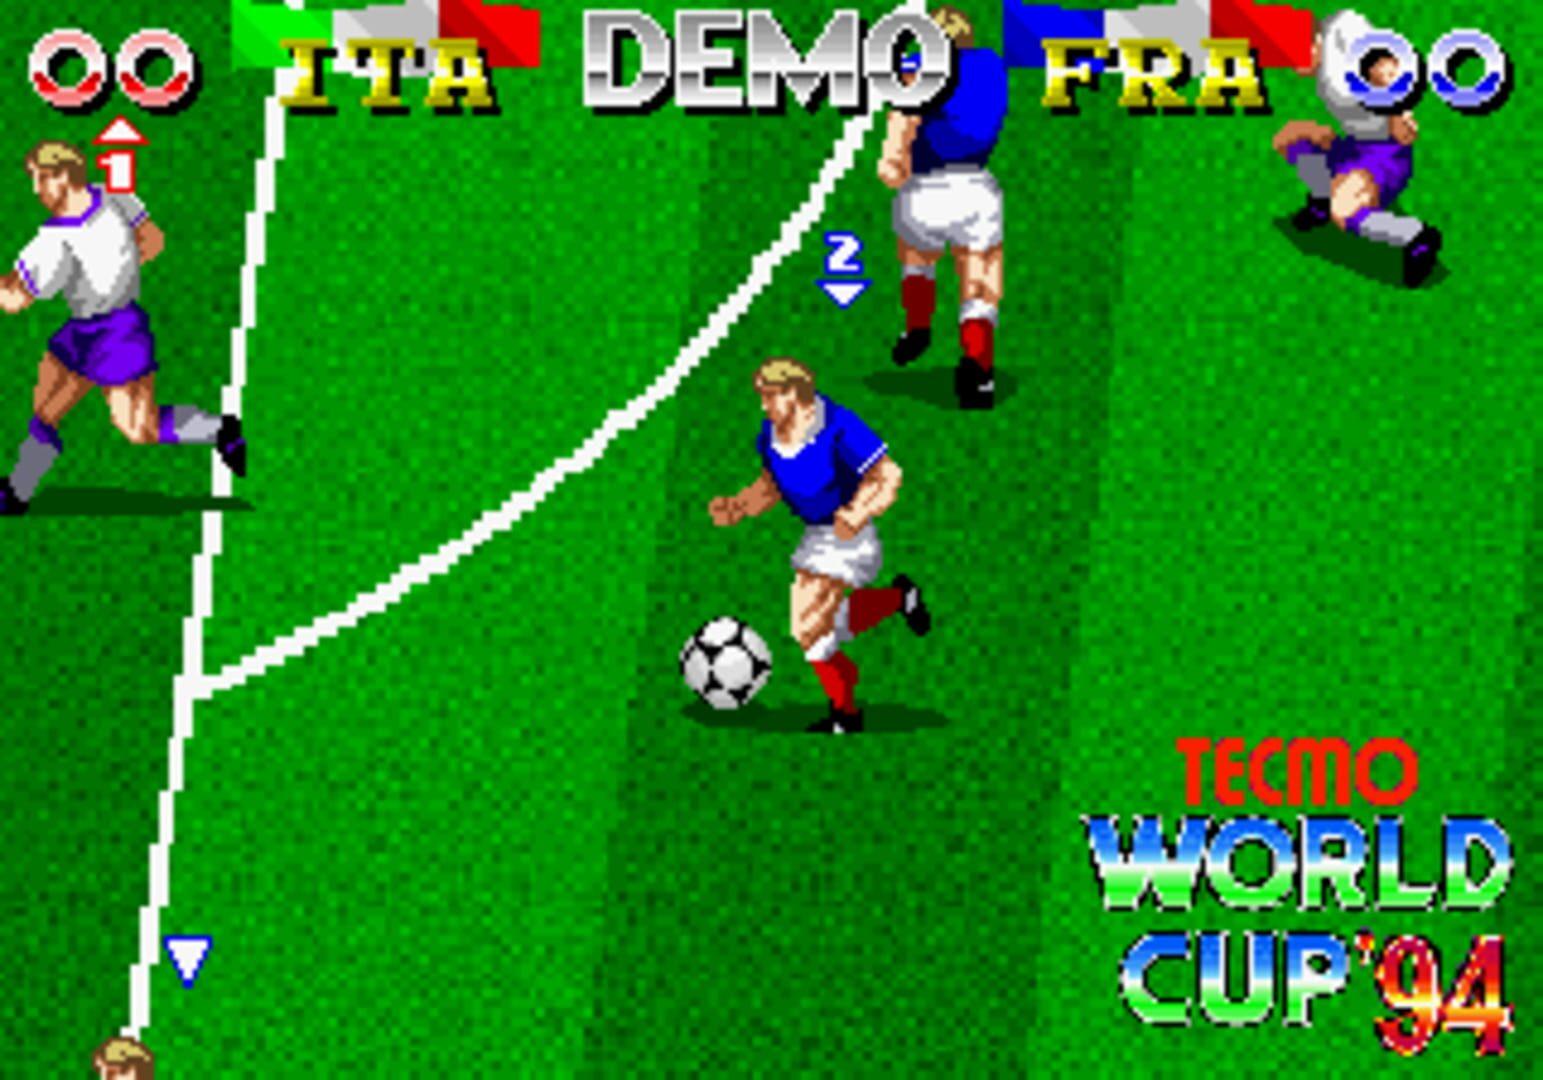 Tecmo World Cup '94 cover art